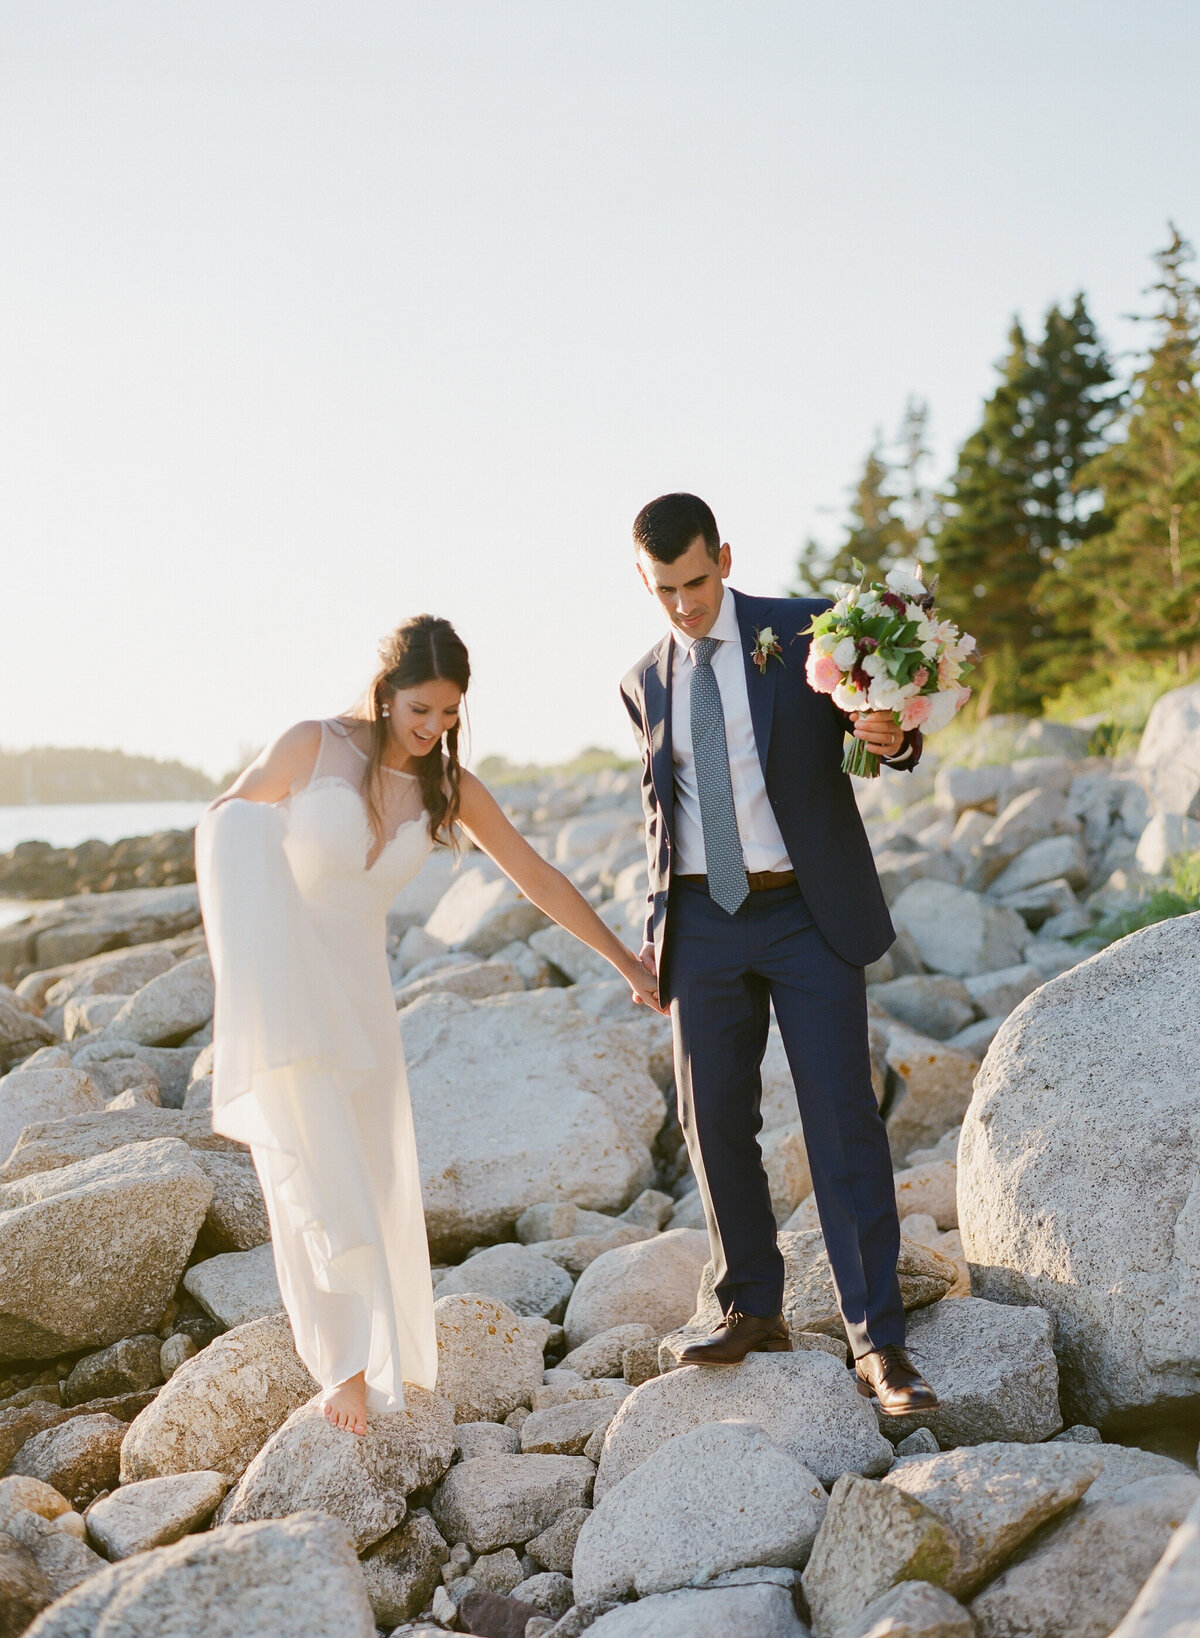 Jacqueline Anne Photography - Halifax Wedding Photographer - Jaclyn and Morgan-85